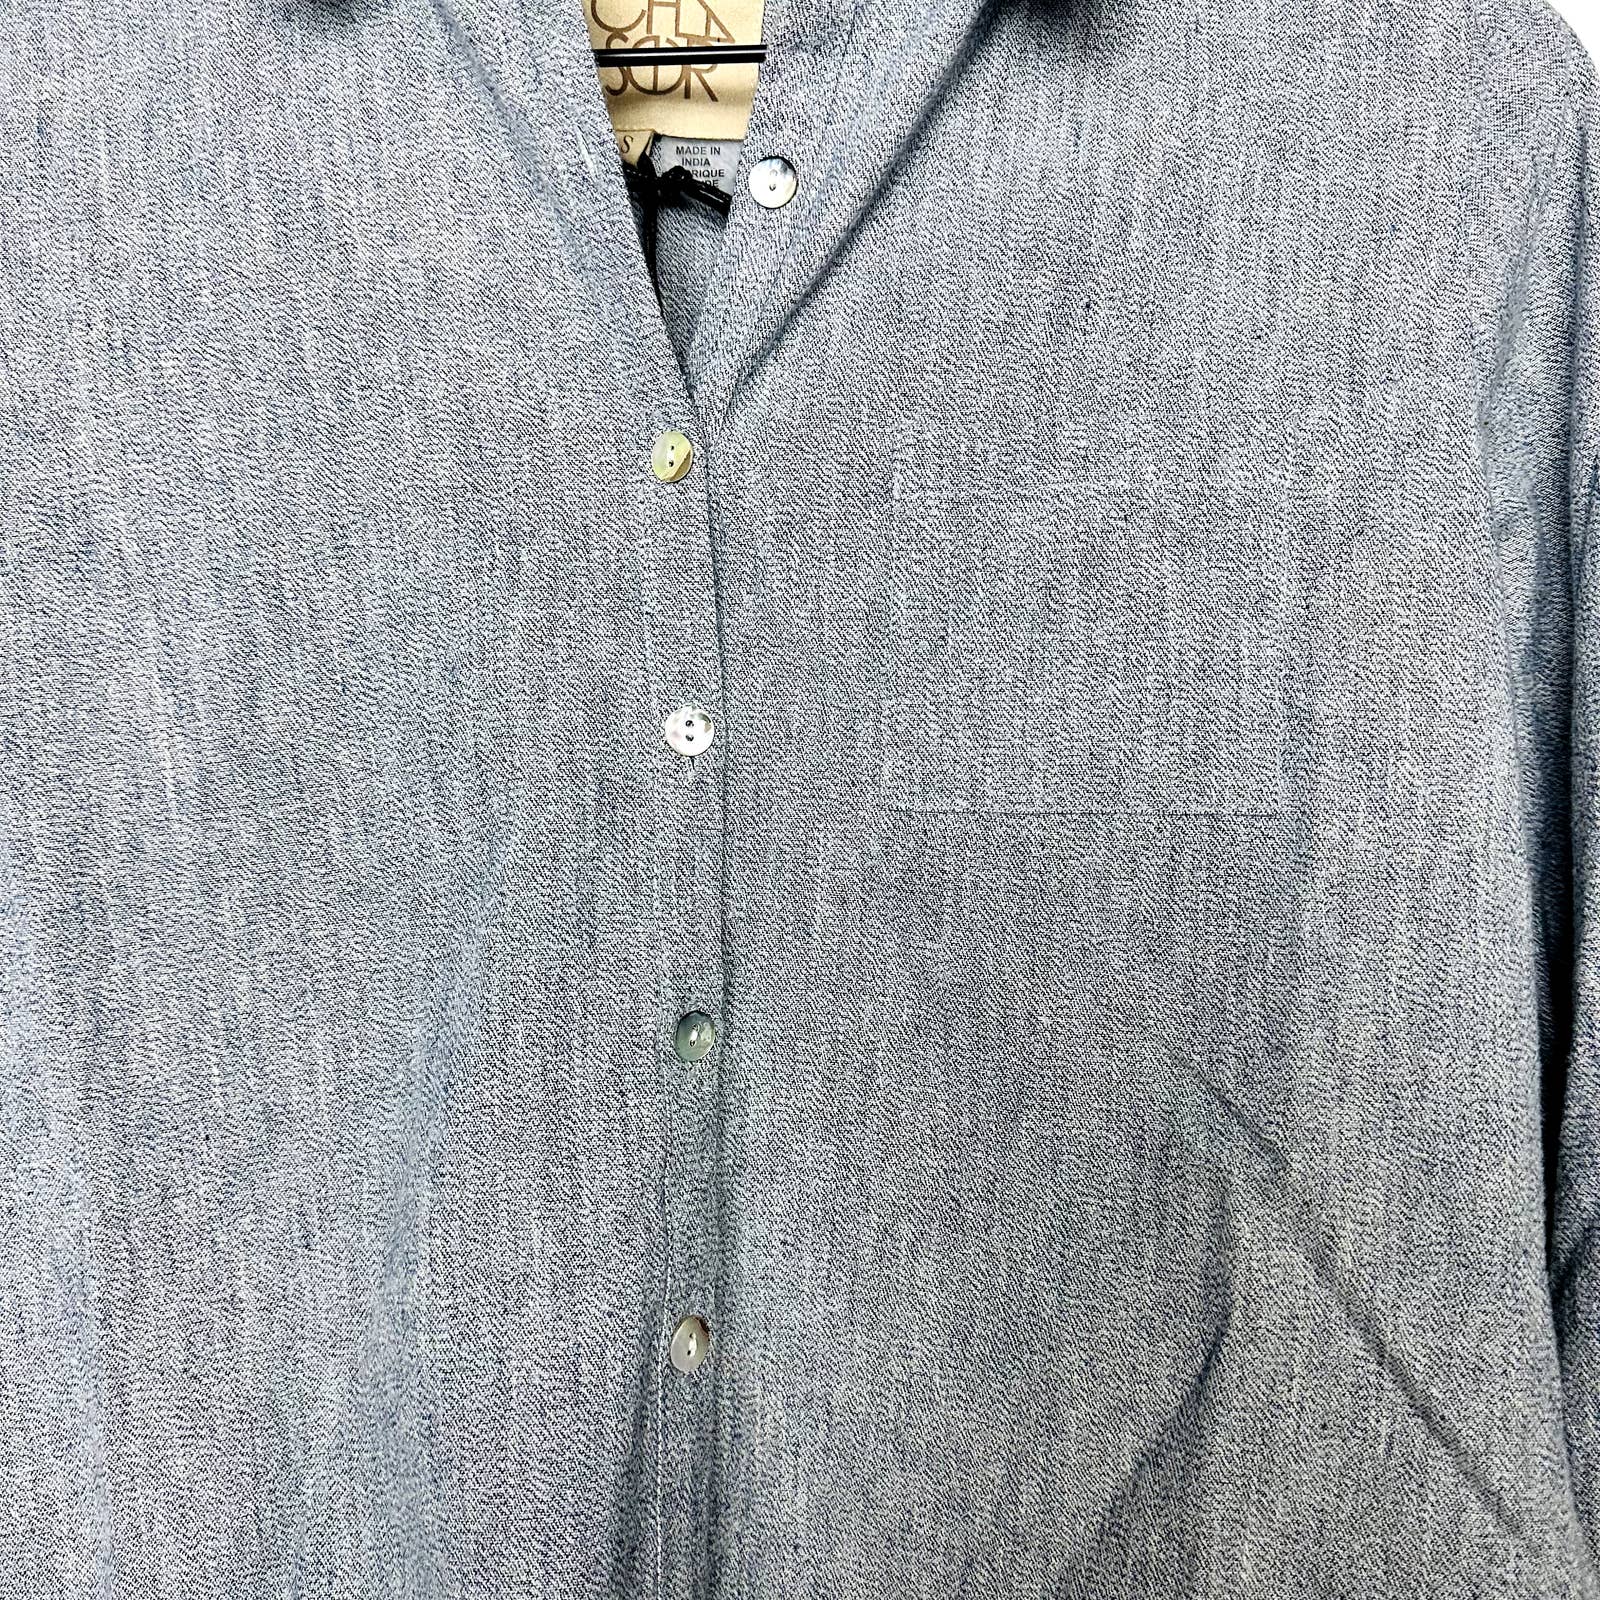 Chaser NWT Button Down Pocket Collared Long Sleeve Classic Shirt Gray Sz Small